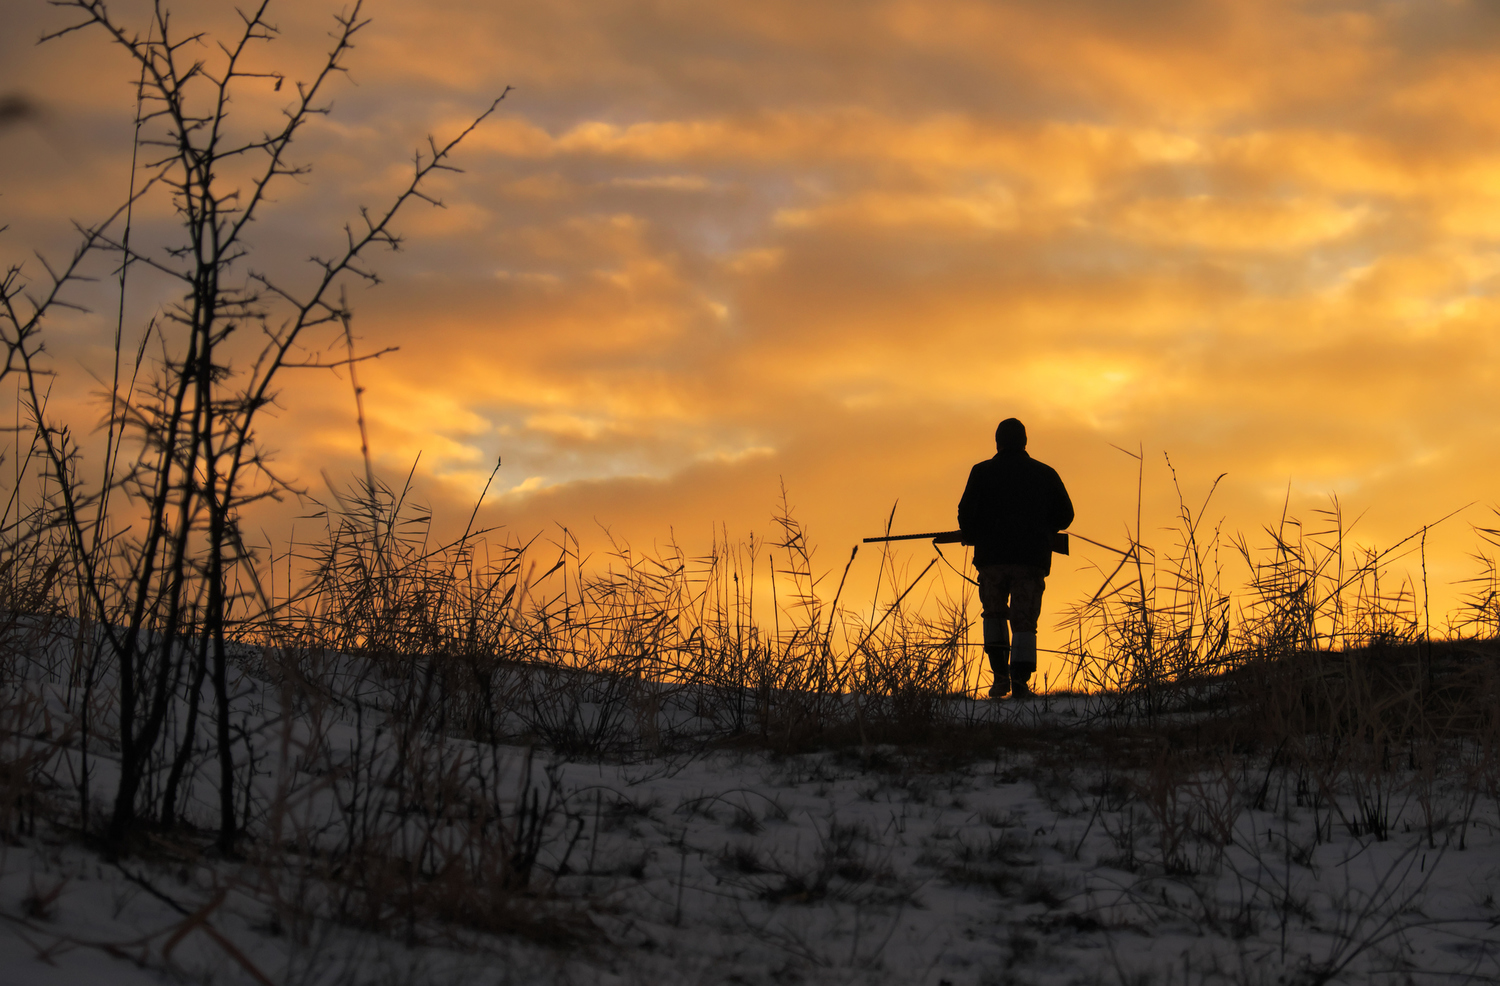 4 causes of hunter-related shooting incidents